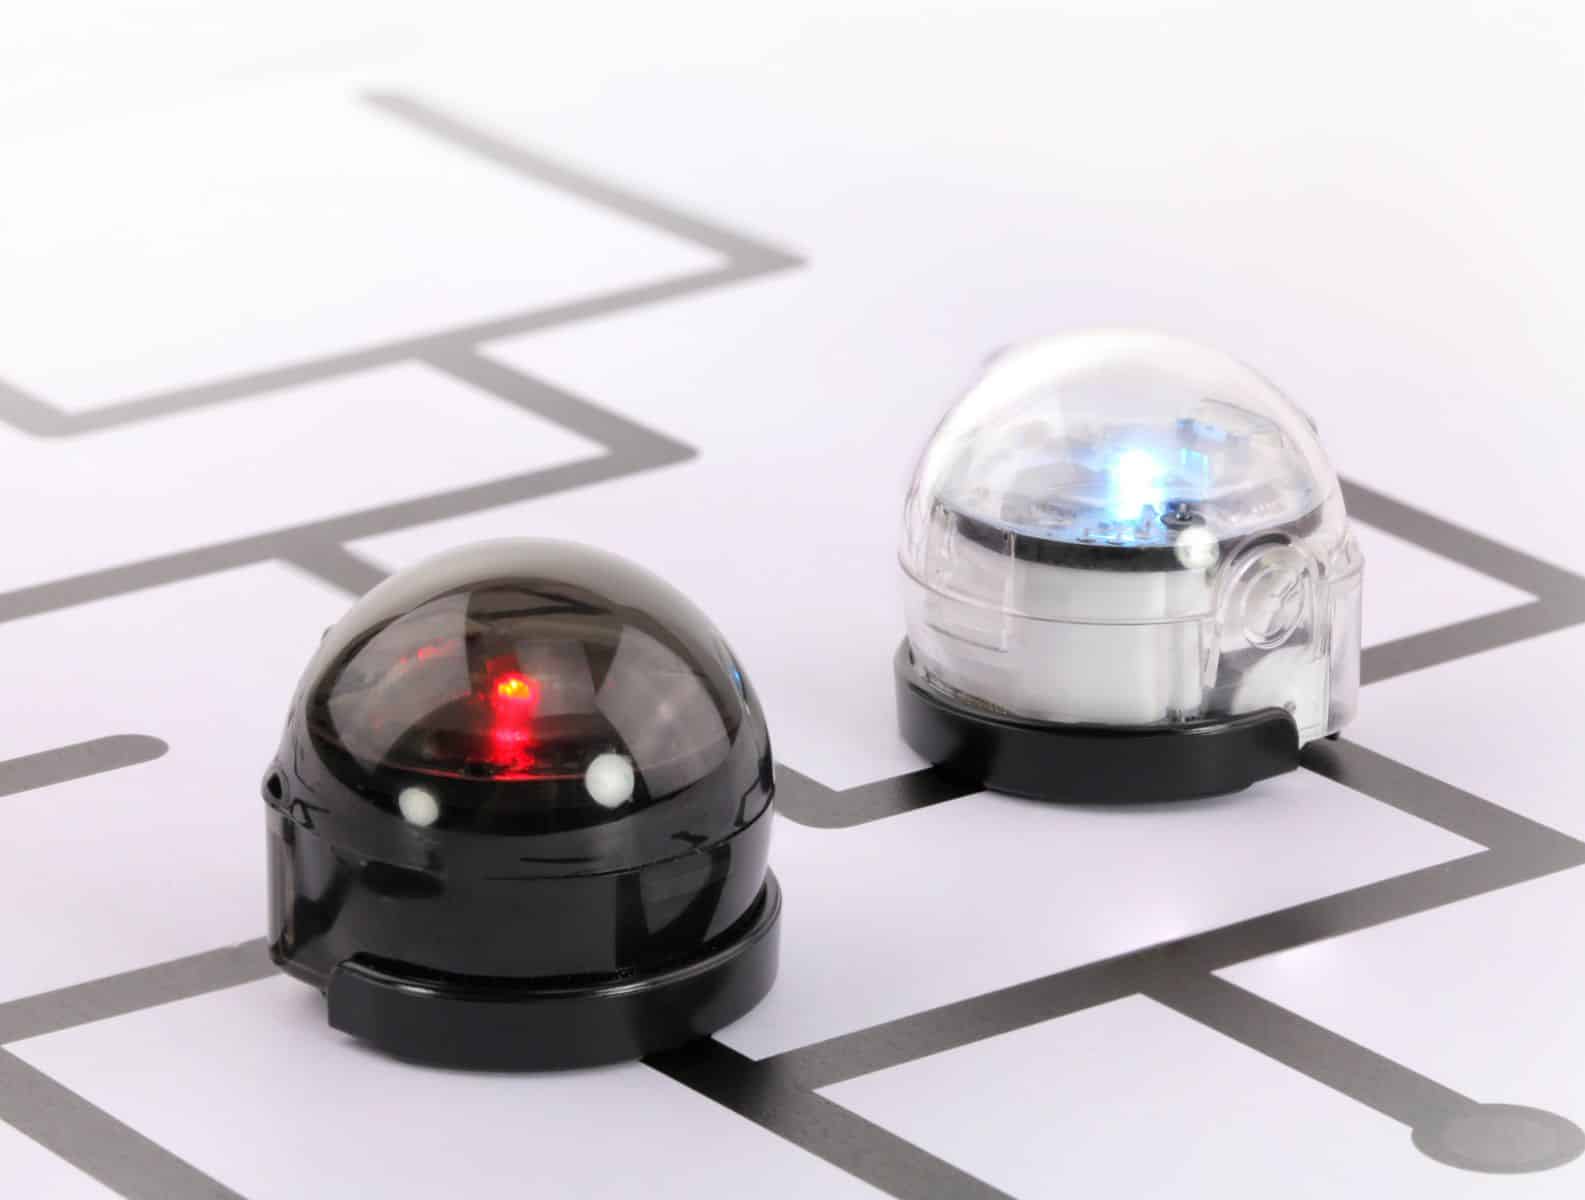 OZOBOT BIT IS A FUN PROGRAMMABLE ROBOT FOR TO CODING